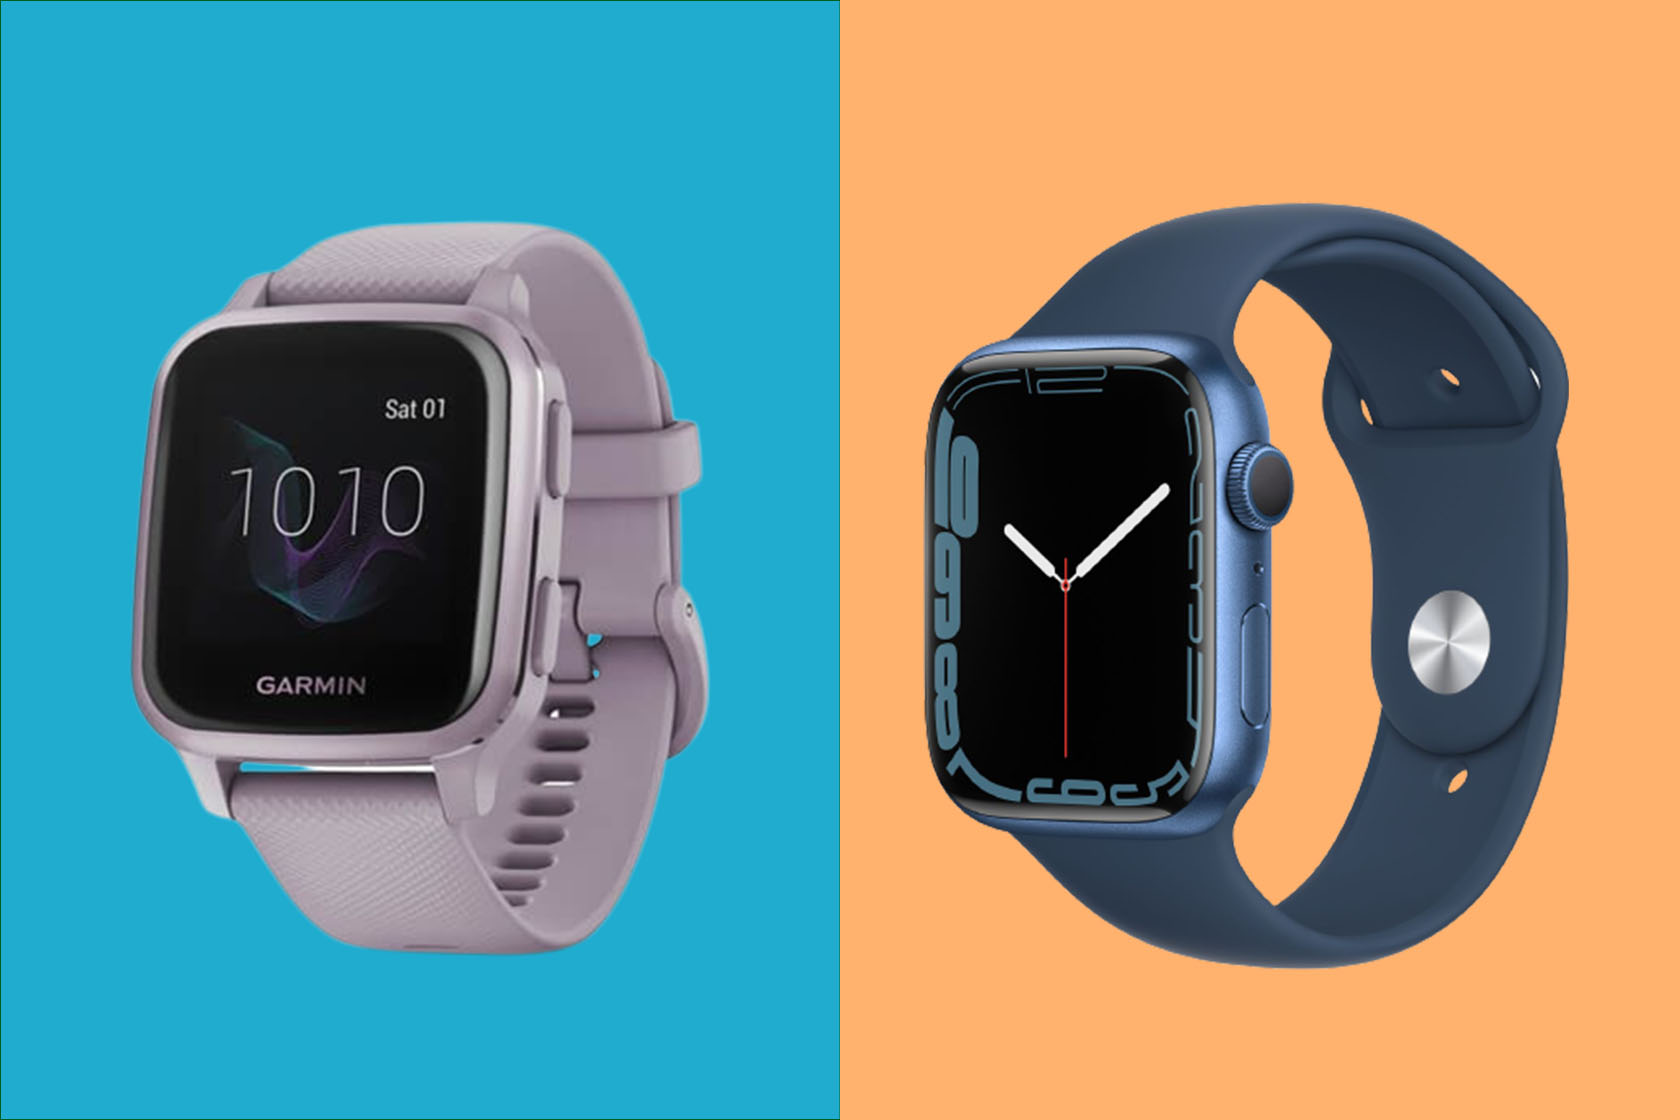 Apple Watch vs. Garmin SmartWatch: how to choose the right one